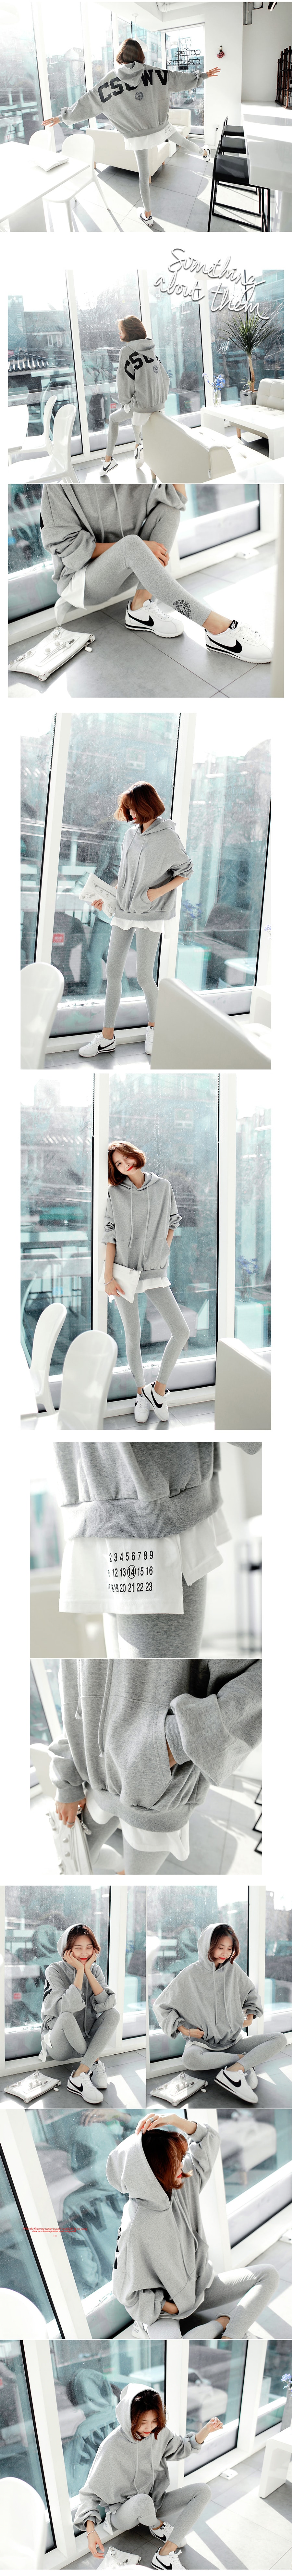 KOREA [Free Shipping] Layered Hoodie and Leggings #Grey 2 pieces One Size(Free)